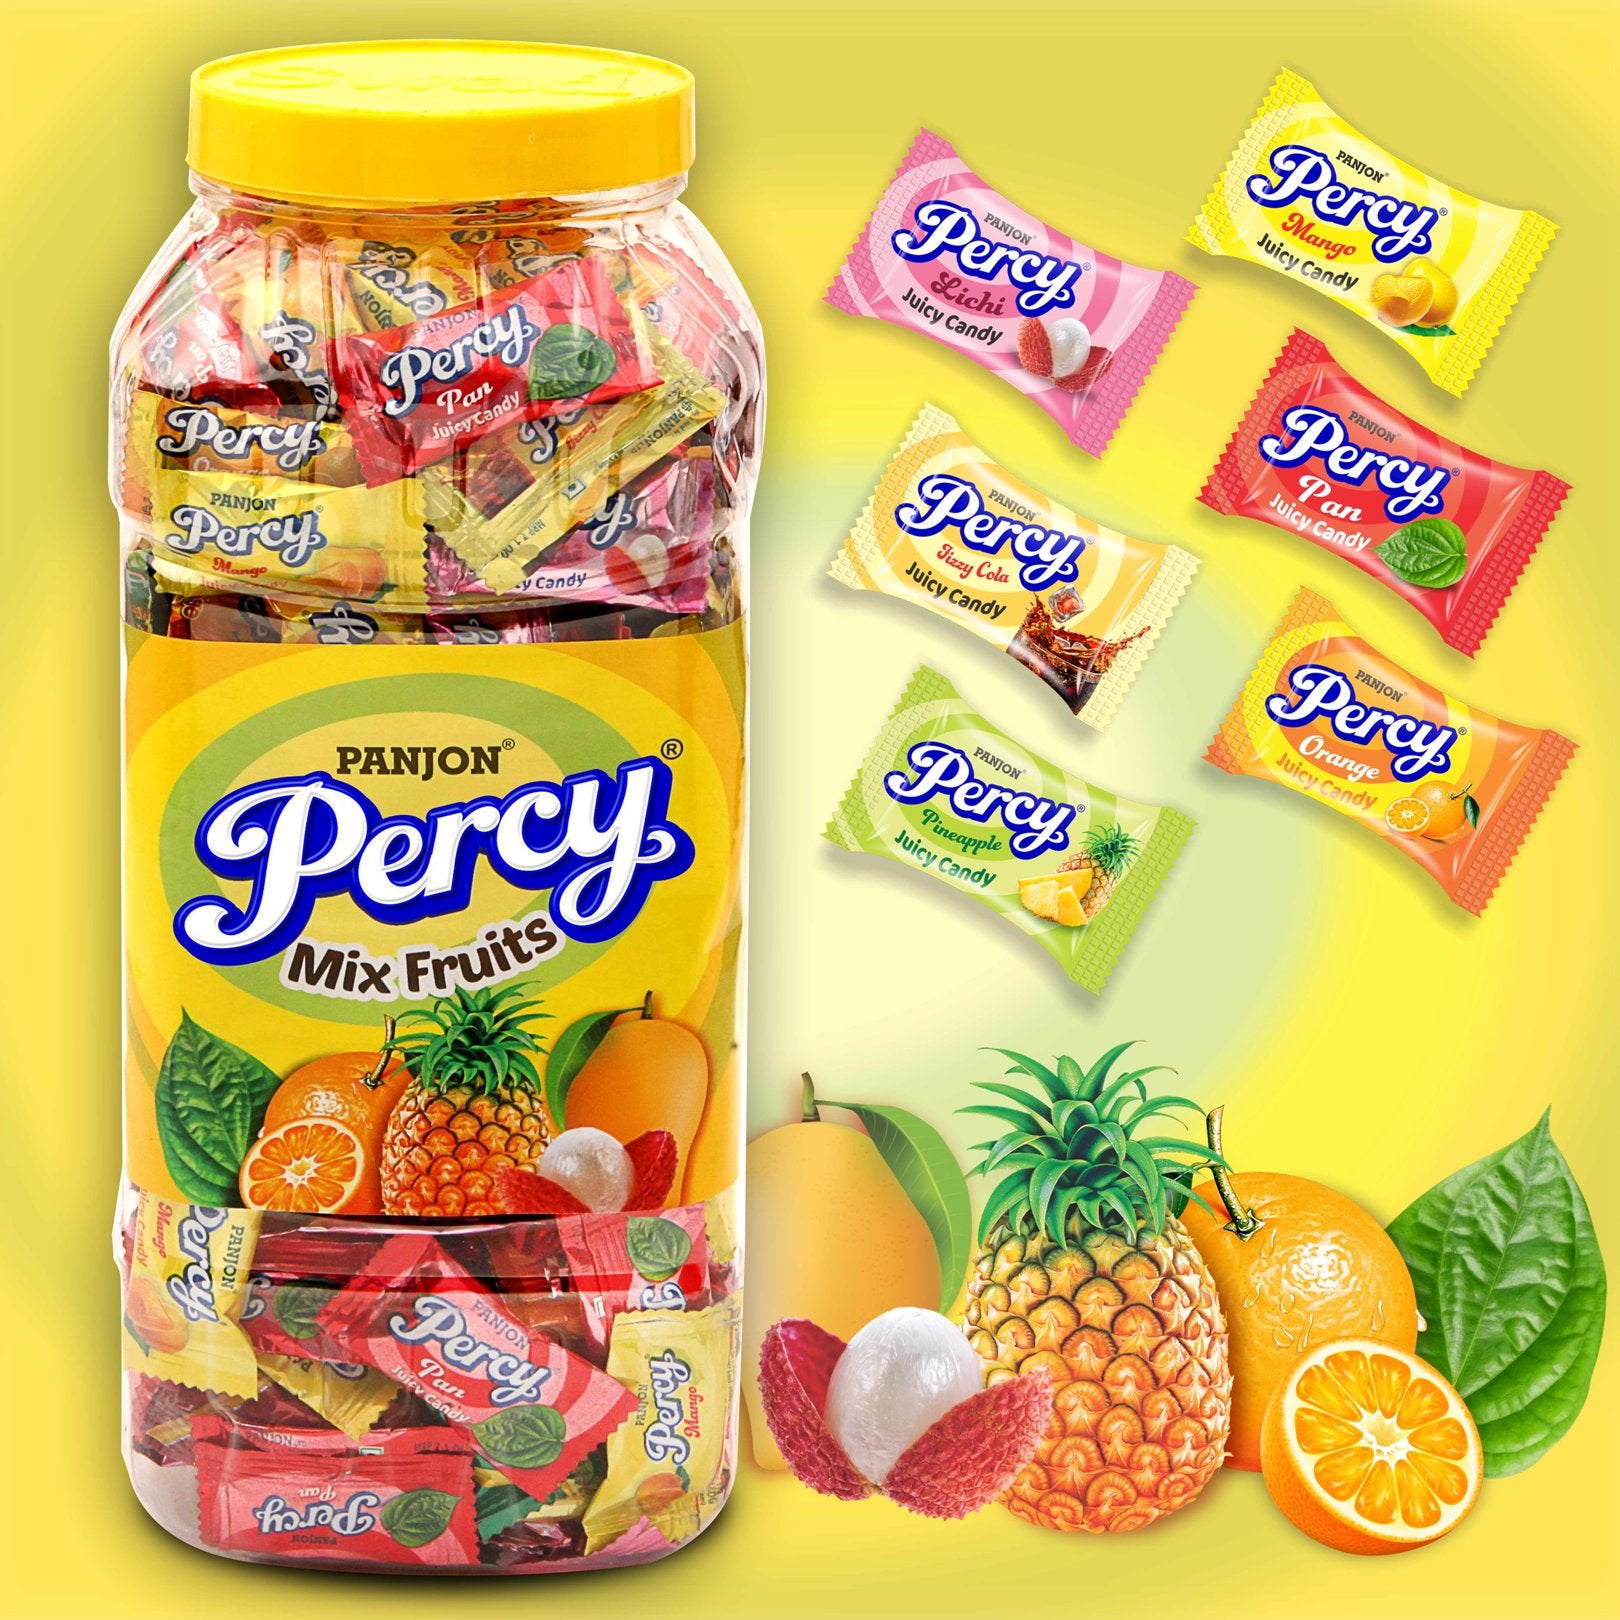 Percy Mix Fruits Assorted Candy Toffee Jar, 875g